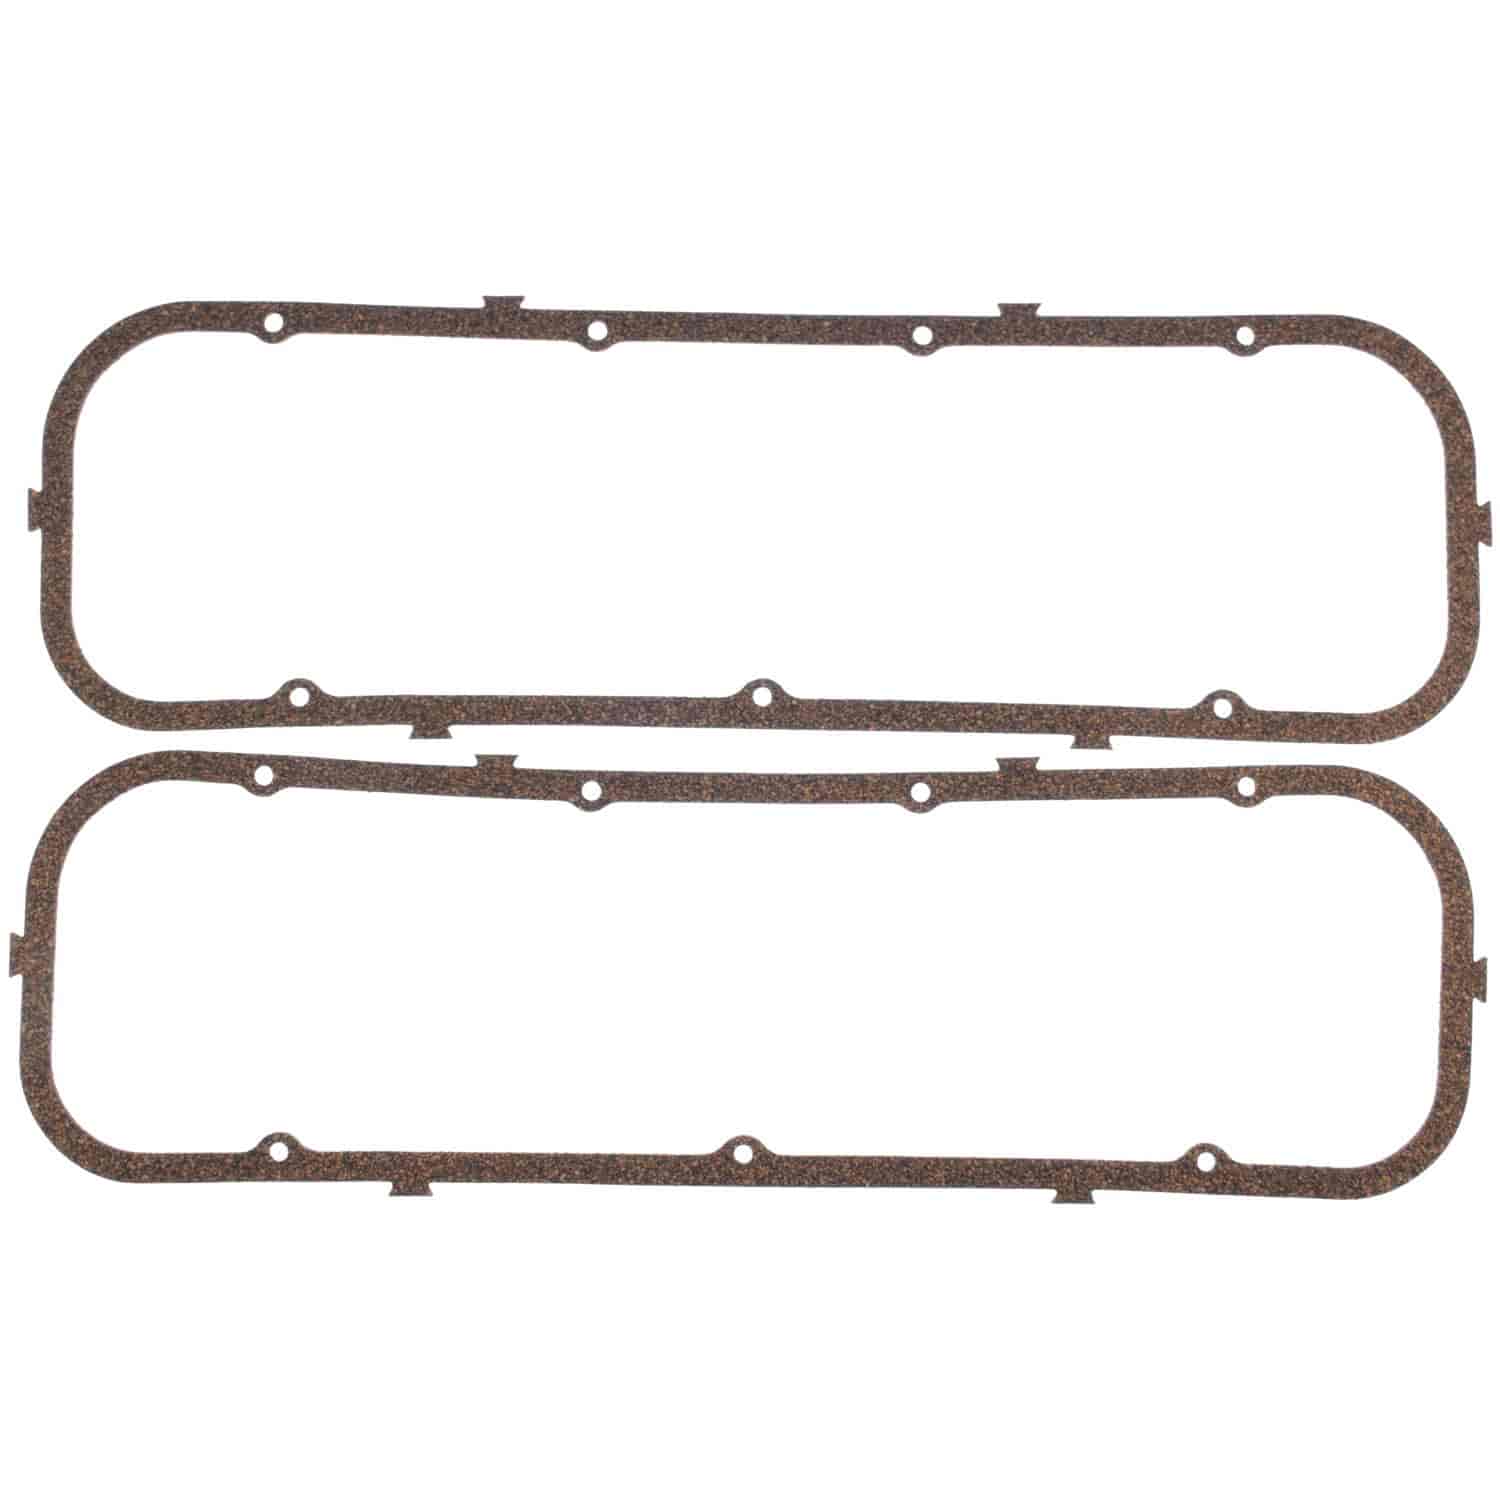 Valve Cover Gasket Set 1965-1985 Big Block Chevy 396/402/427/454 in Cork-Rubber